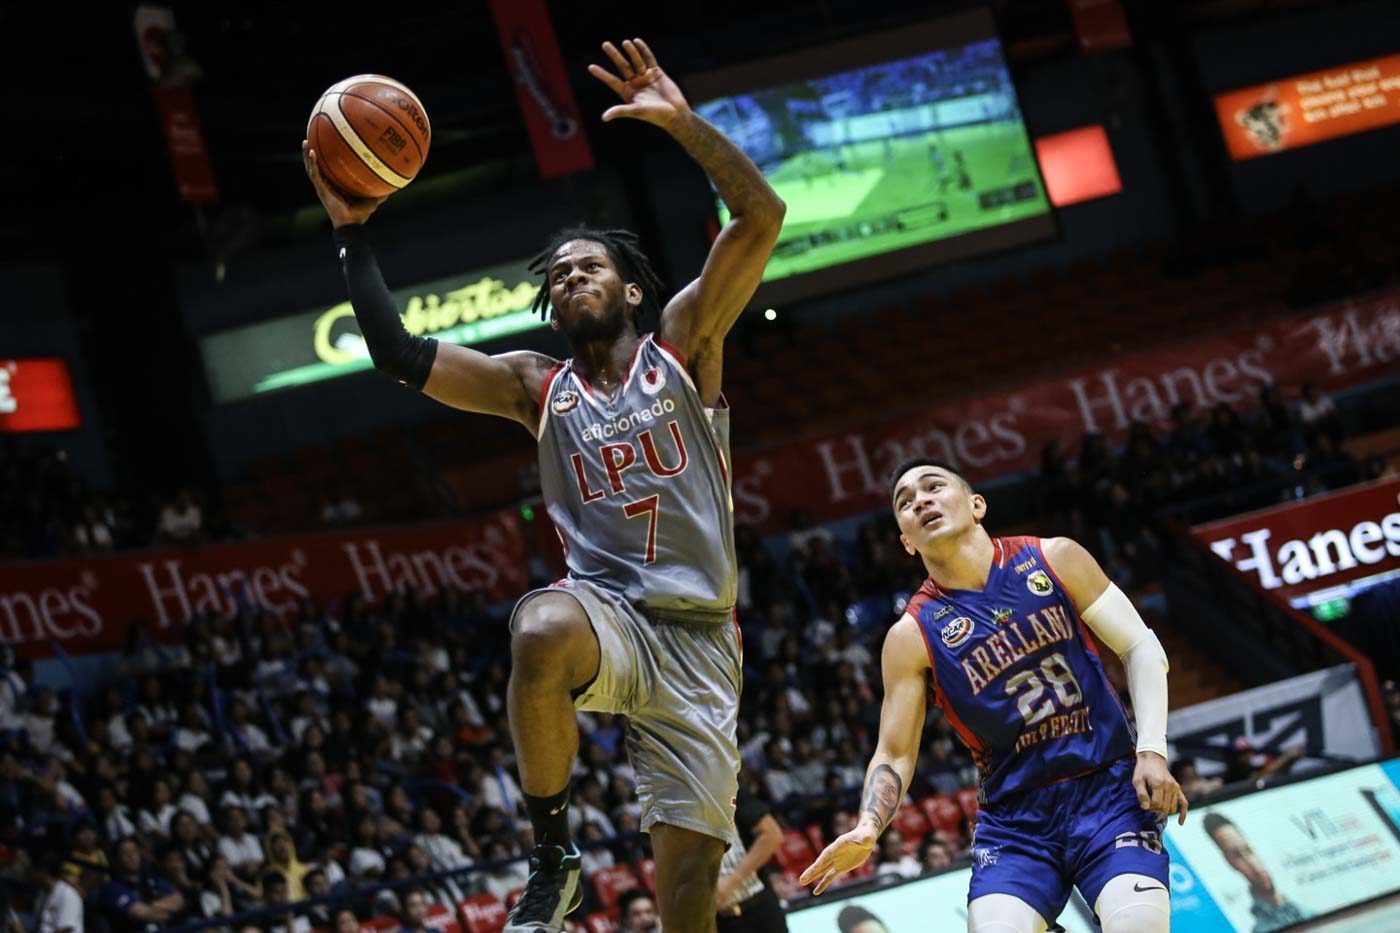 Lyceum demolishes Arellano by 34 in bounce-back win